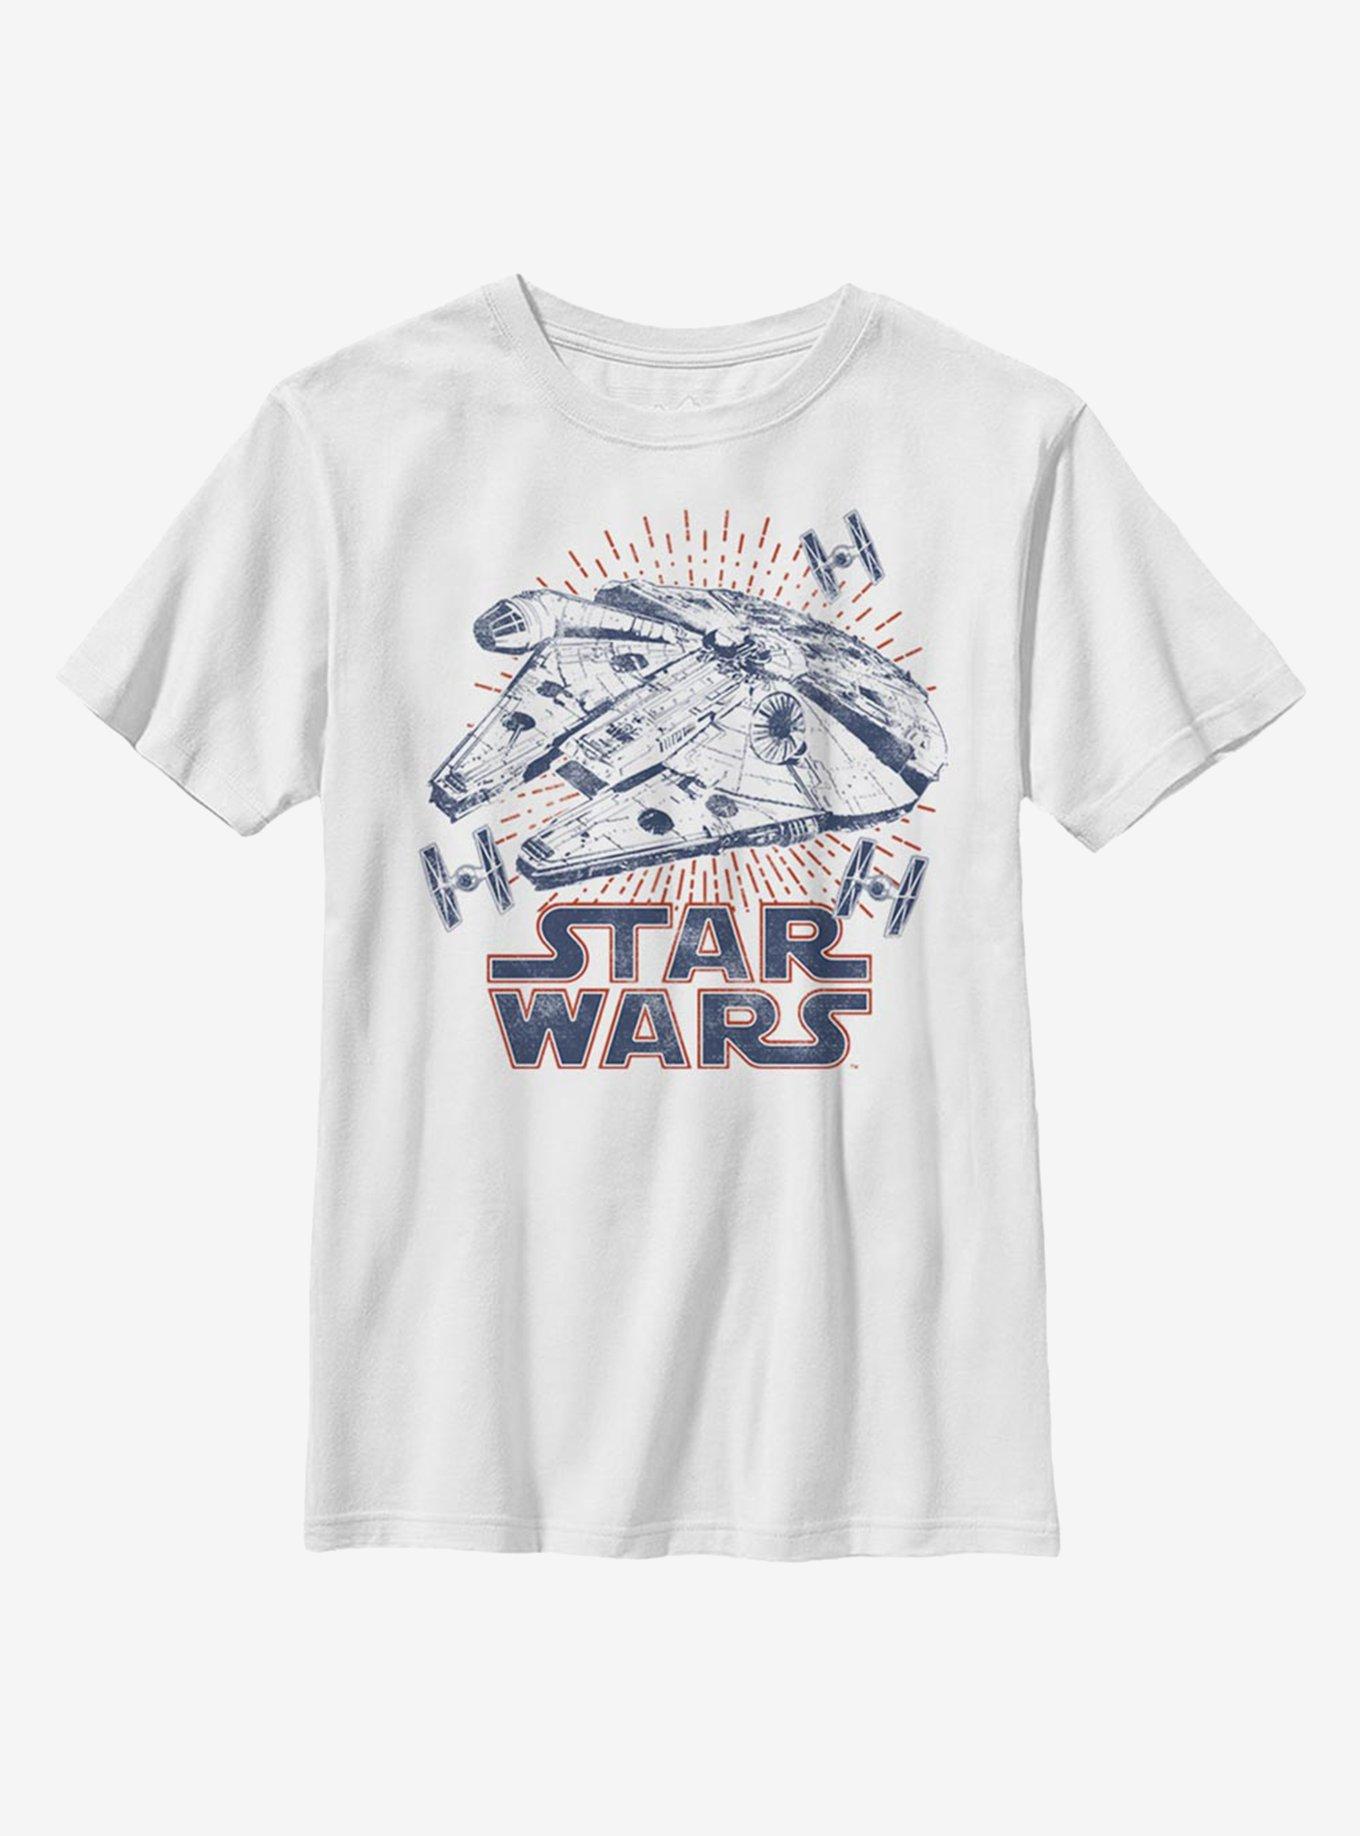 Star Wars Falcon Rays Youth T-Shirt, WHITE, hi-res